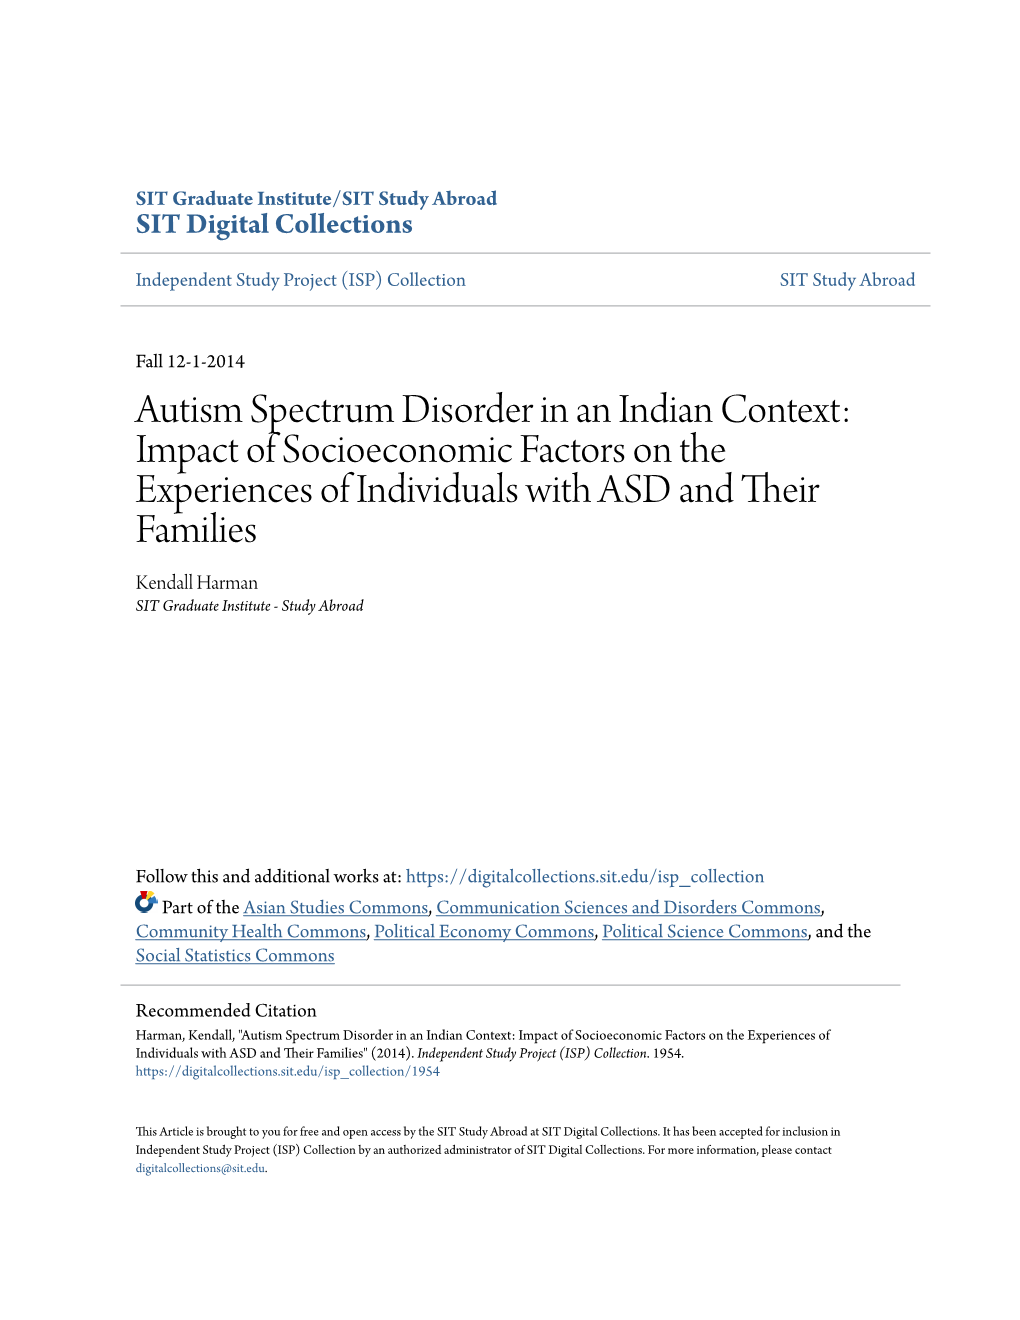 Autism Spectrum Disorder in an Indian Context